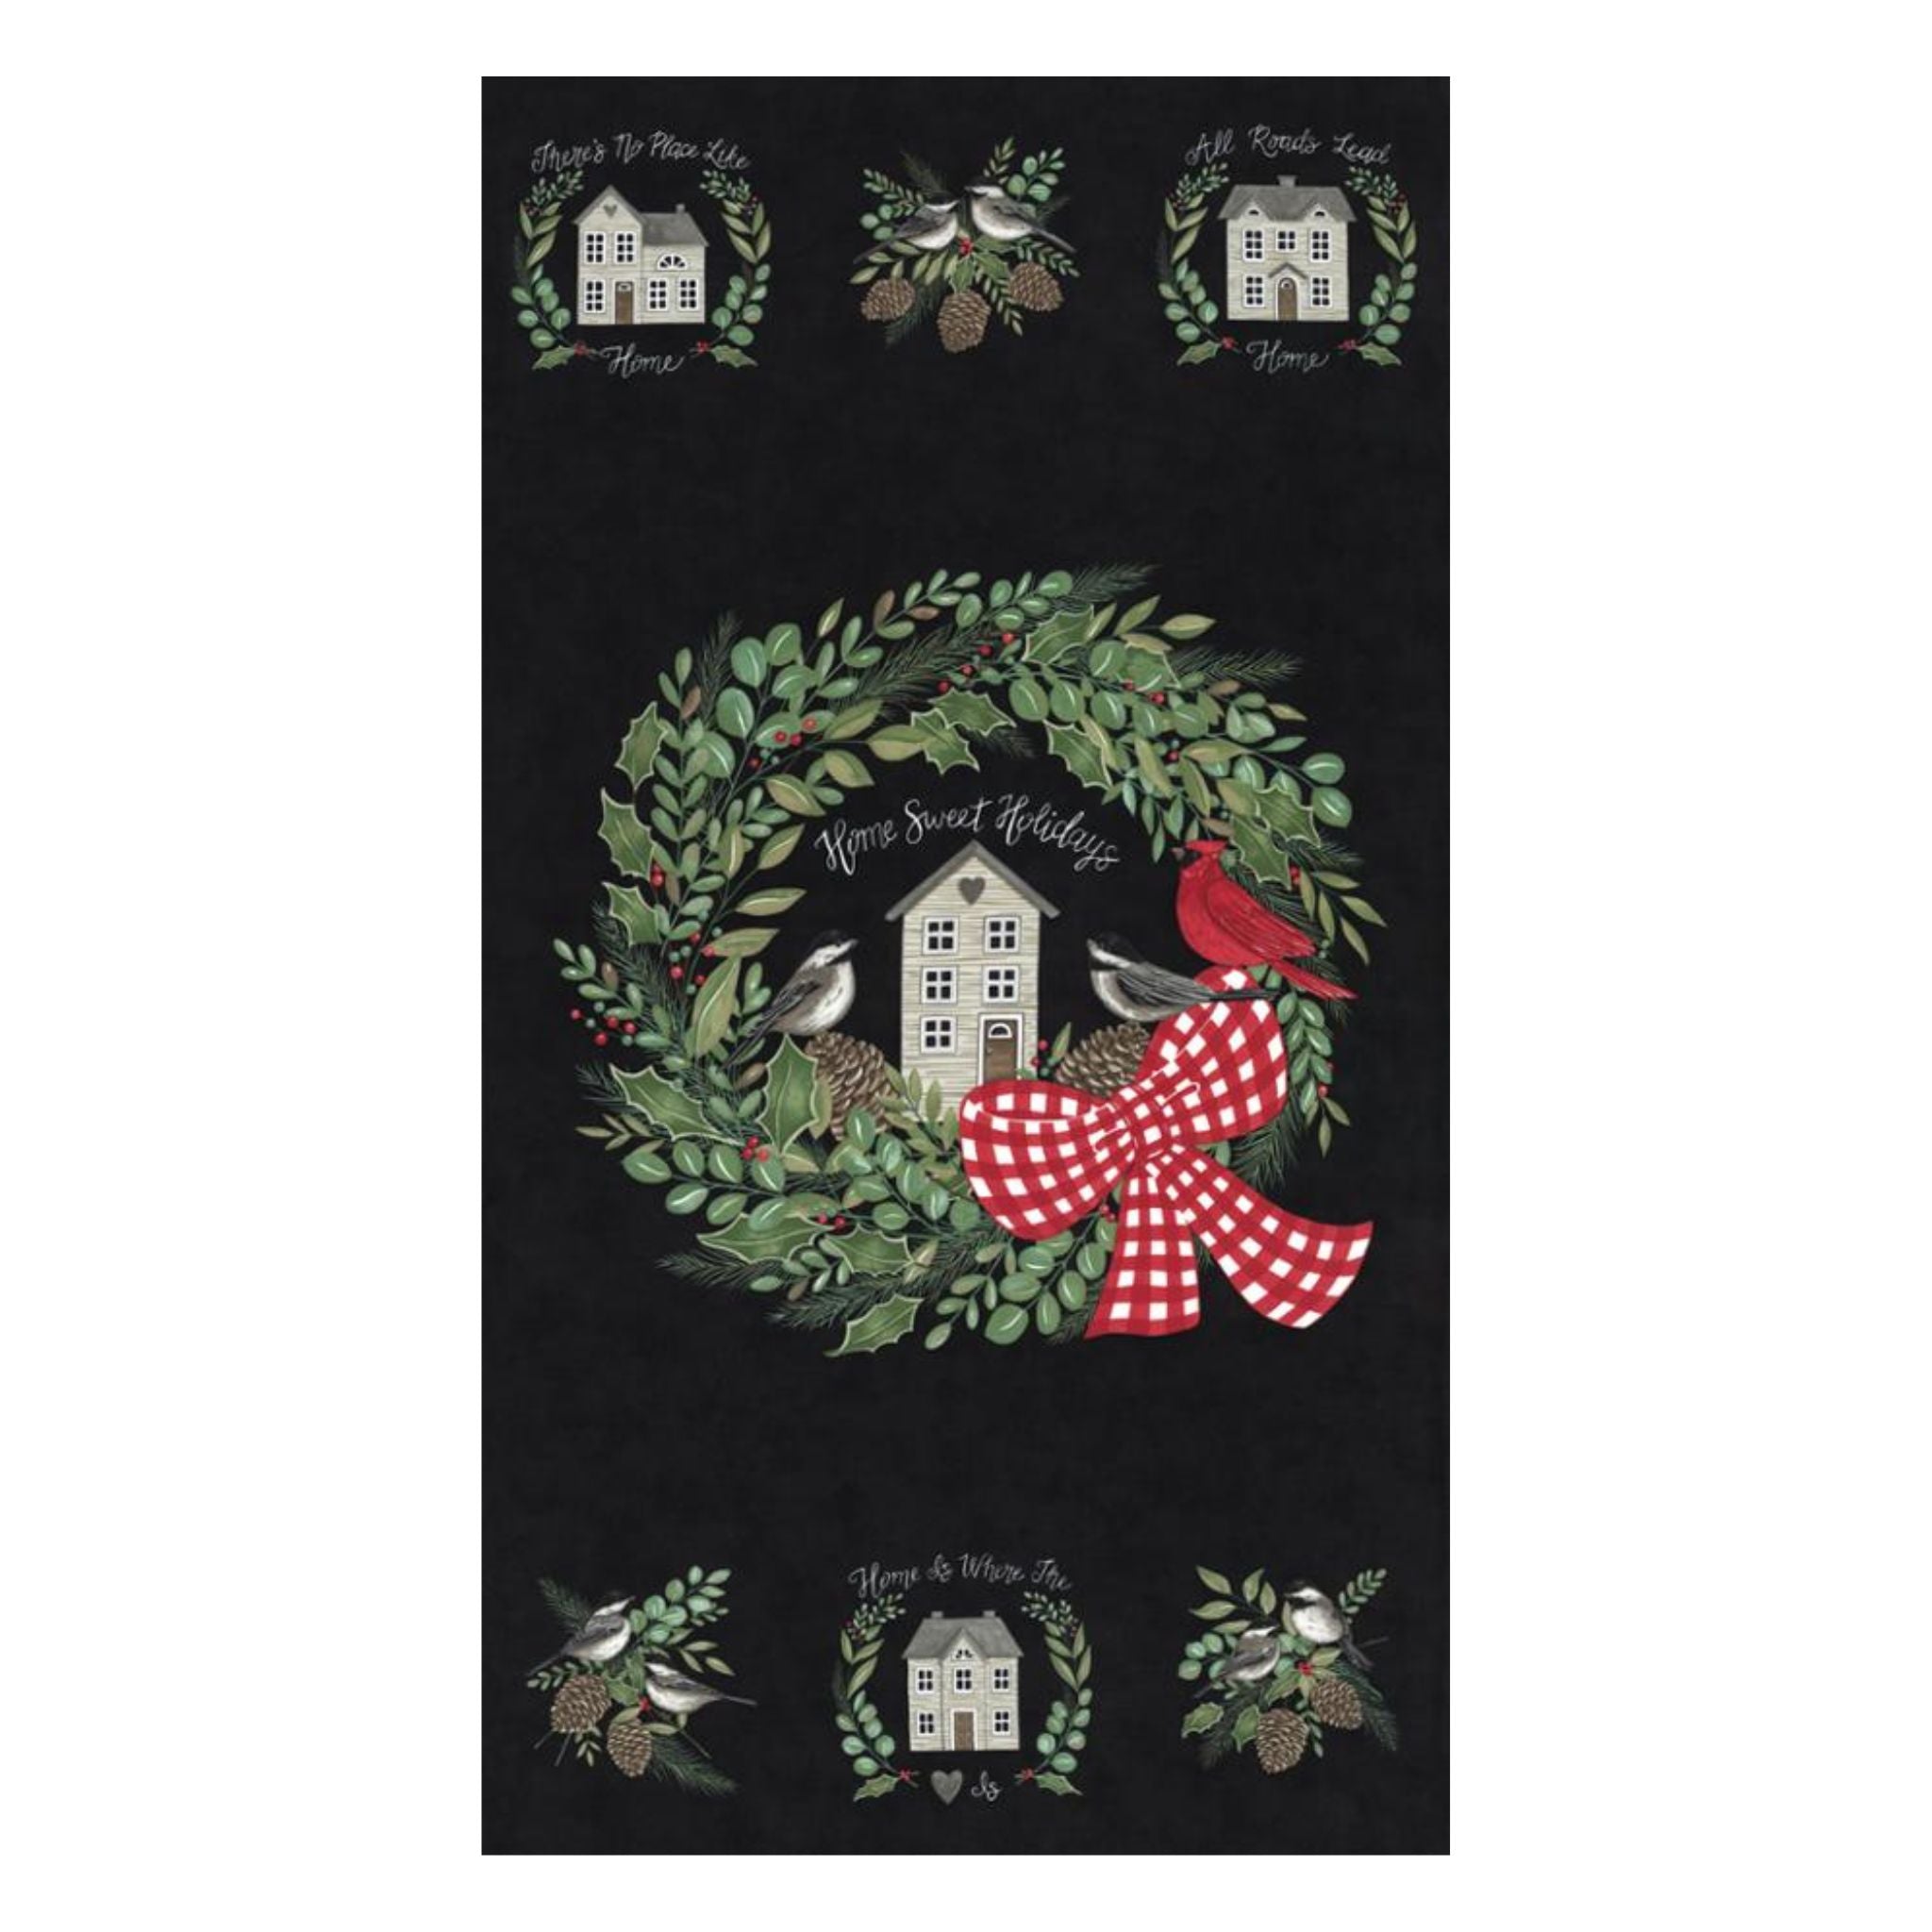 Christmas wreath with birds dn white house on black cotton fabric - Holidays at Home by Moda